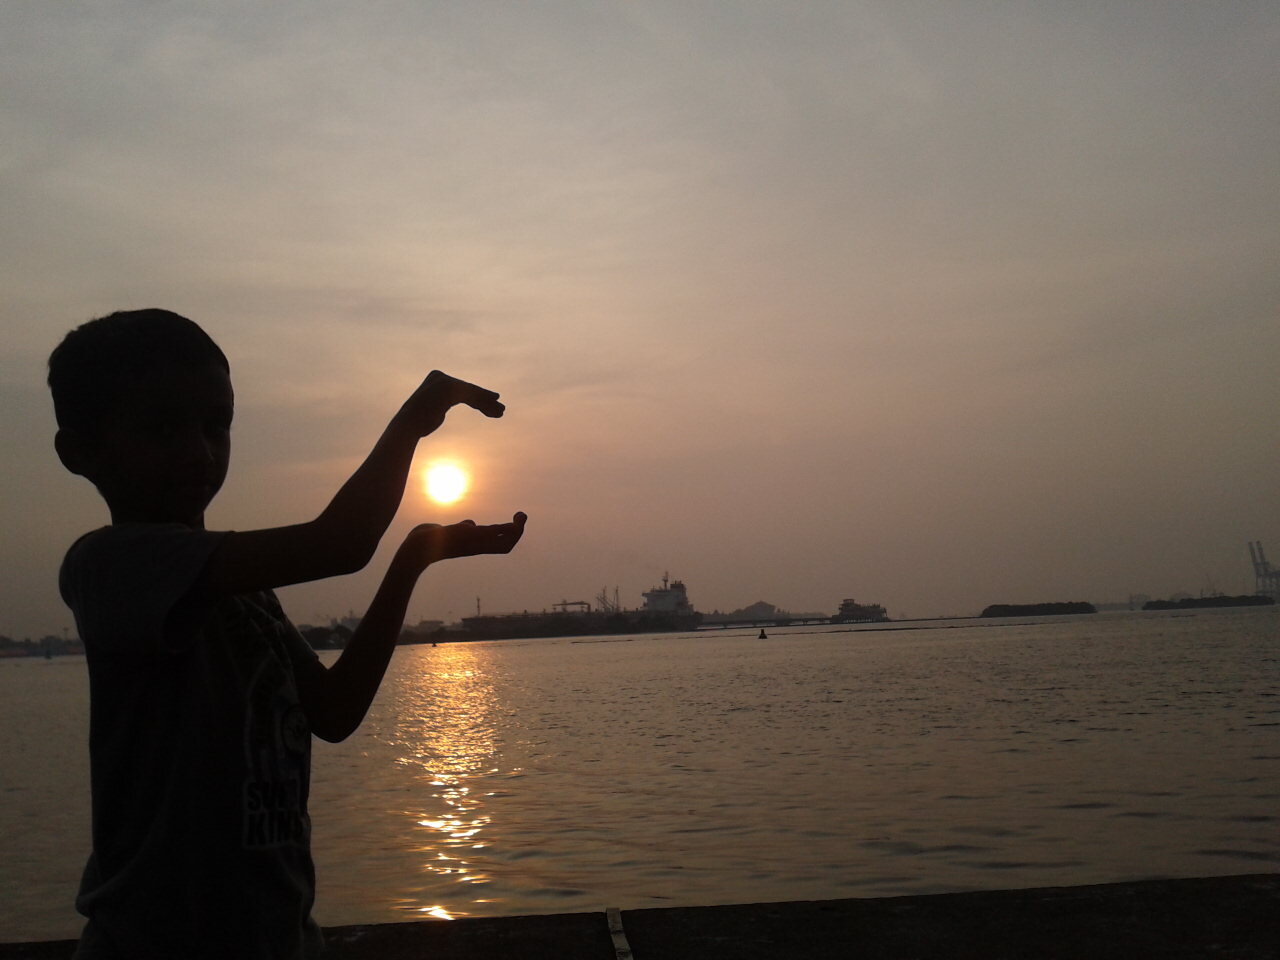 me at the beach - holding the sun